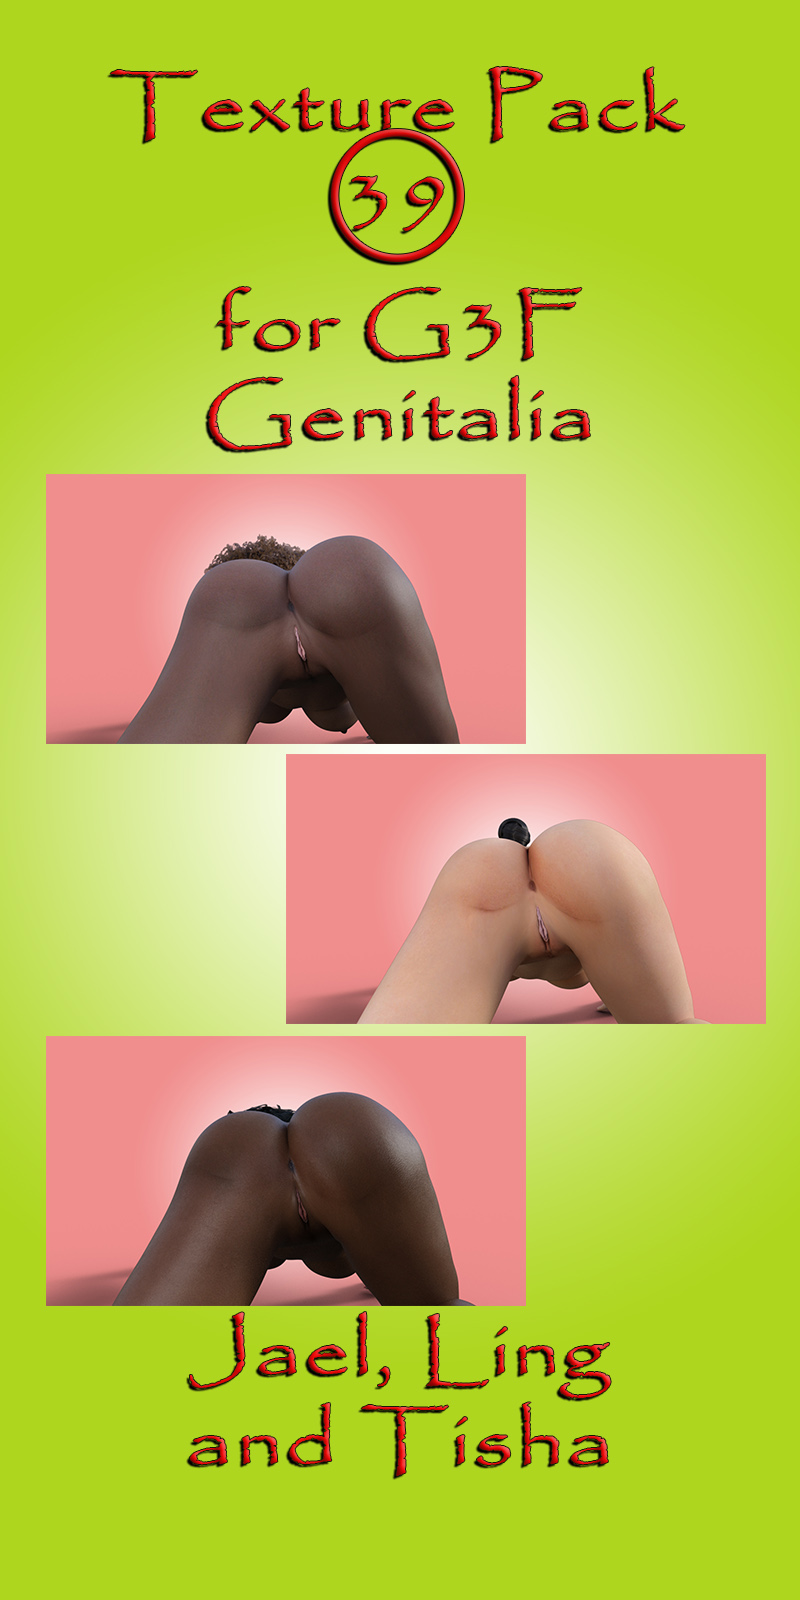 Iray Texture Pack 39 For G3F Genitalia